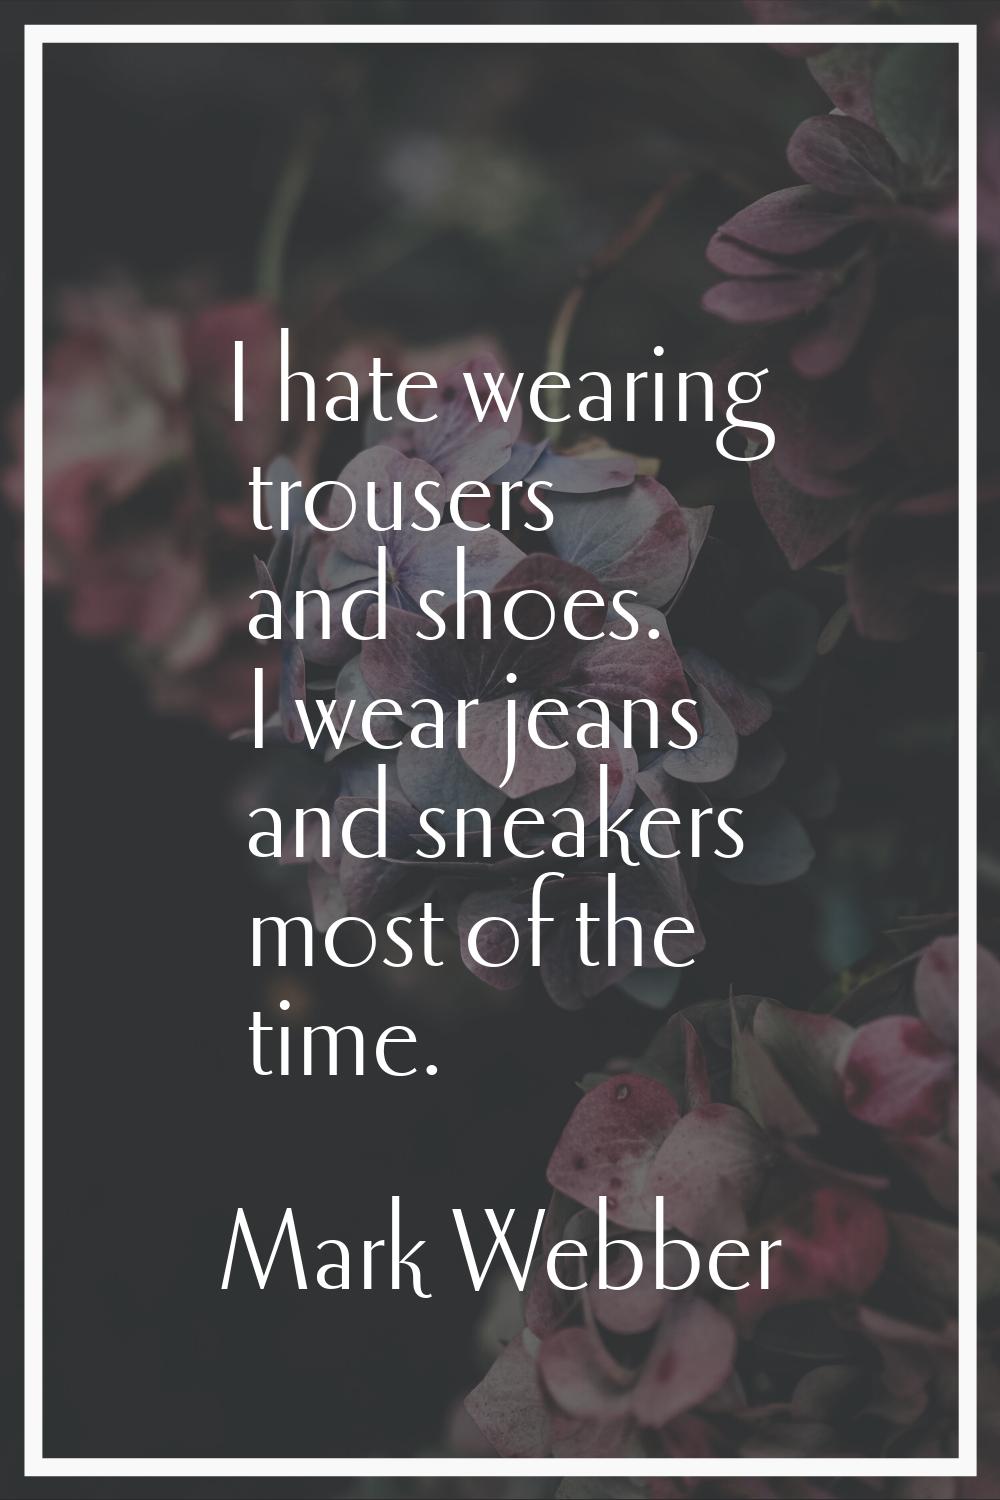 I hate wearing trousers and shoes. I wear jeans and sneakers most of the time.